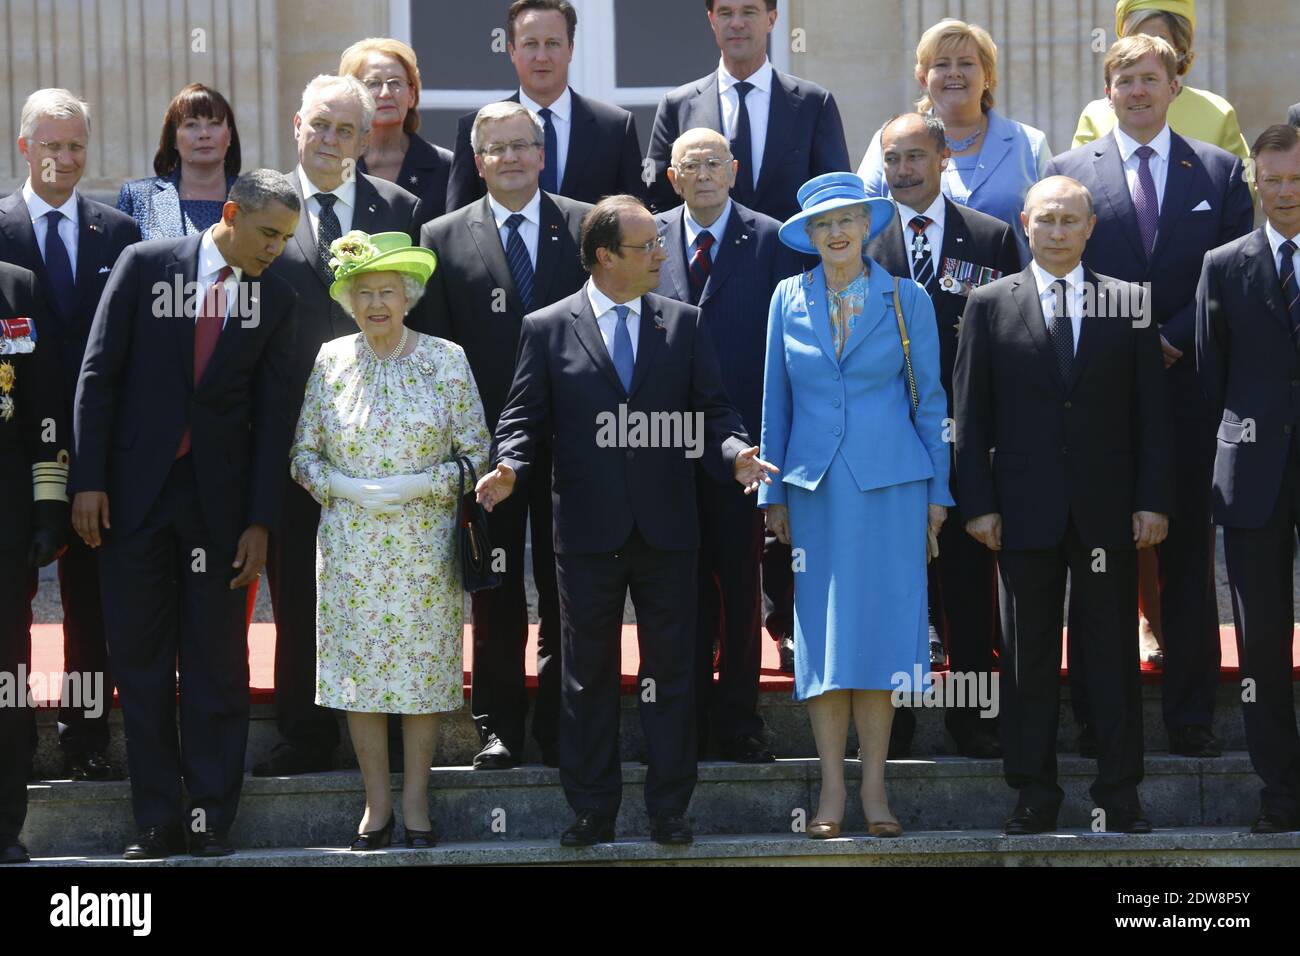 US President Barack Obama participates in a group photo of world leaders attending the D-Day 70th Anniversary ceremonies at Chateau de Benouville in Benouville, France, June 6, 2014. The D-Day ceremonies mark the 70th anniversary of the launching of 'Operation Overlord', a vast military operation by Allied forces in Normandy, which turned the tide of World War II, eventually leading to the liberation of occupied France and the end of the war against Nazi Germany. Photo by Denis Allard/Pool/ABACAPRESS.COM Stock Photo